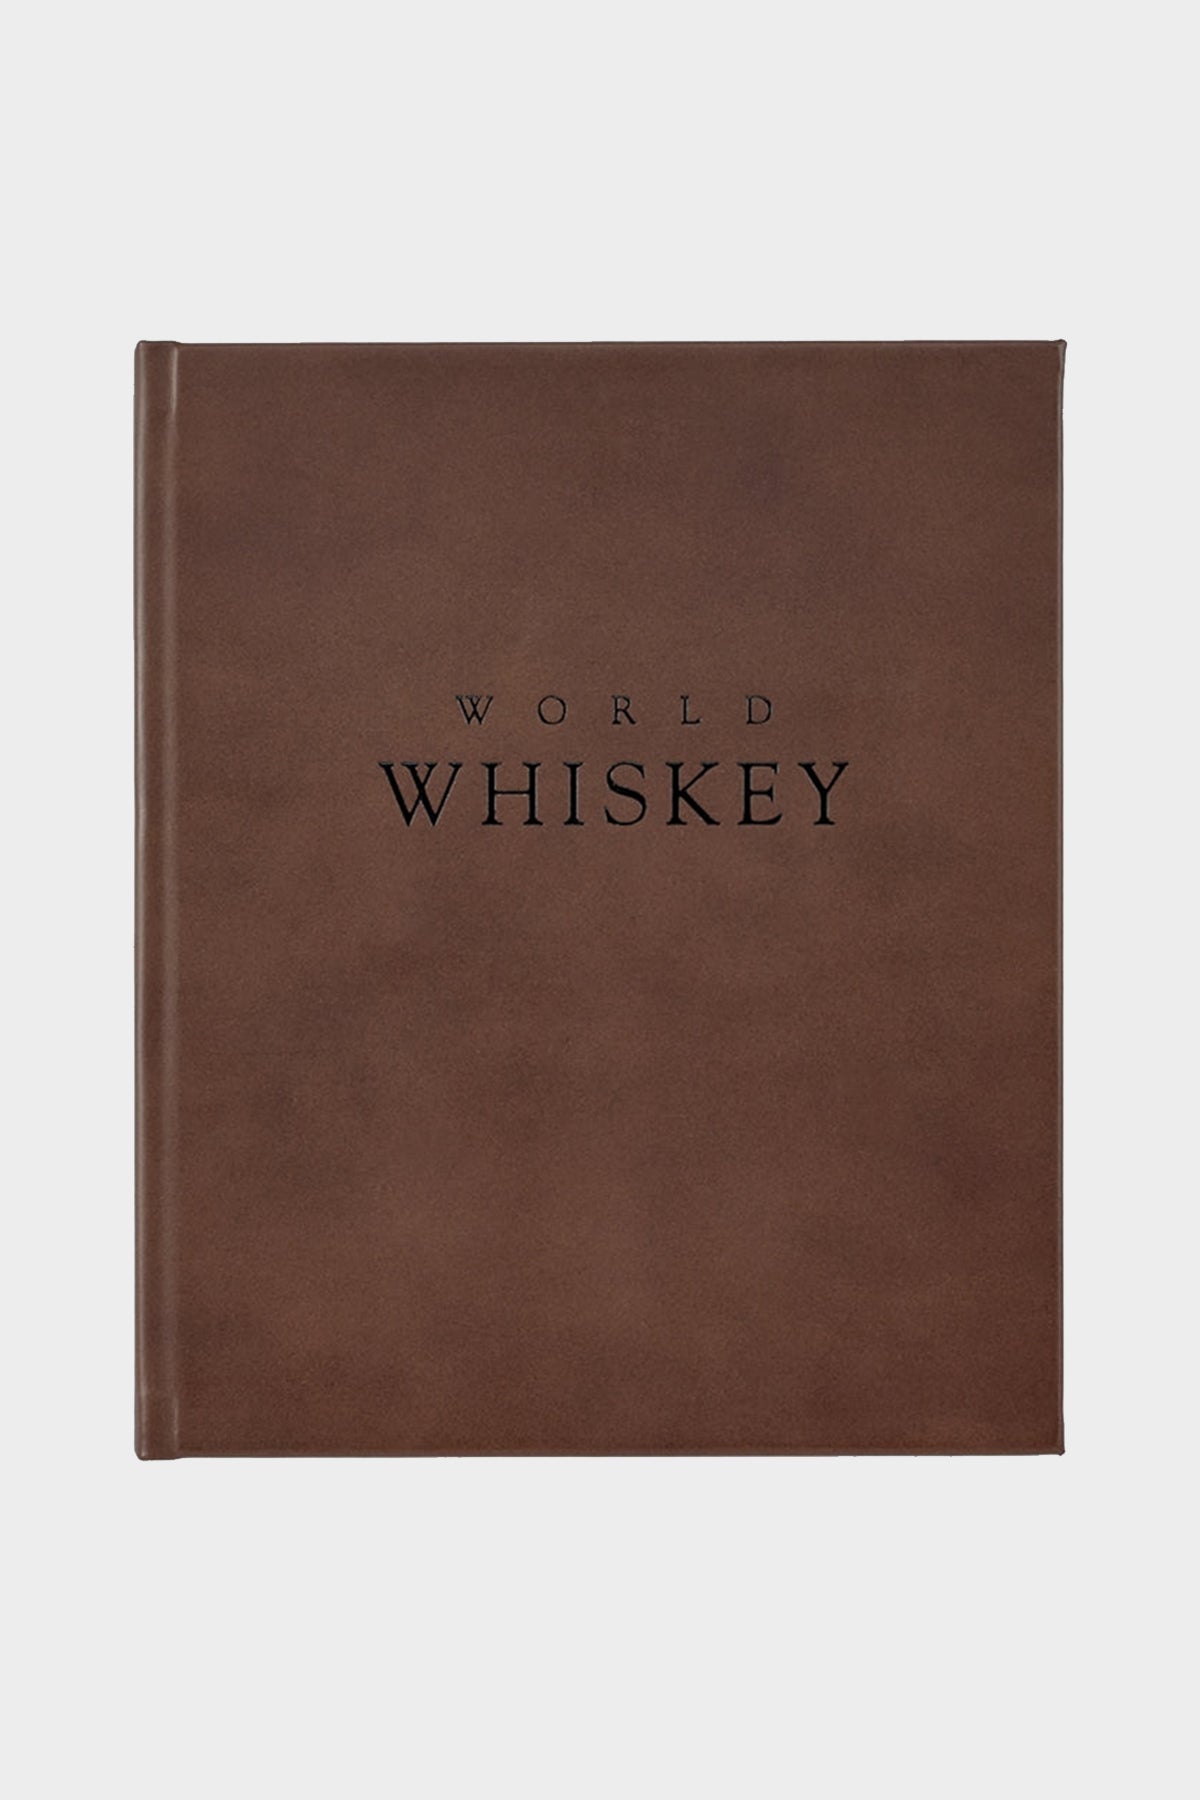 World Whiskey in Brown Leather - shop-olivia.com